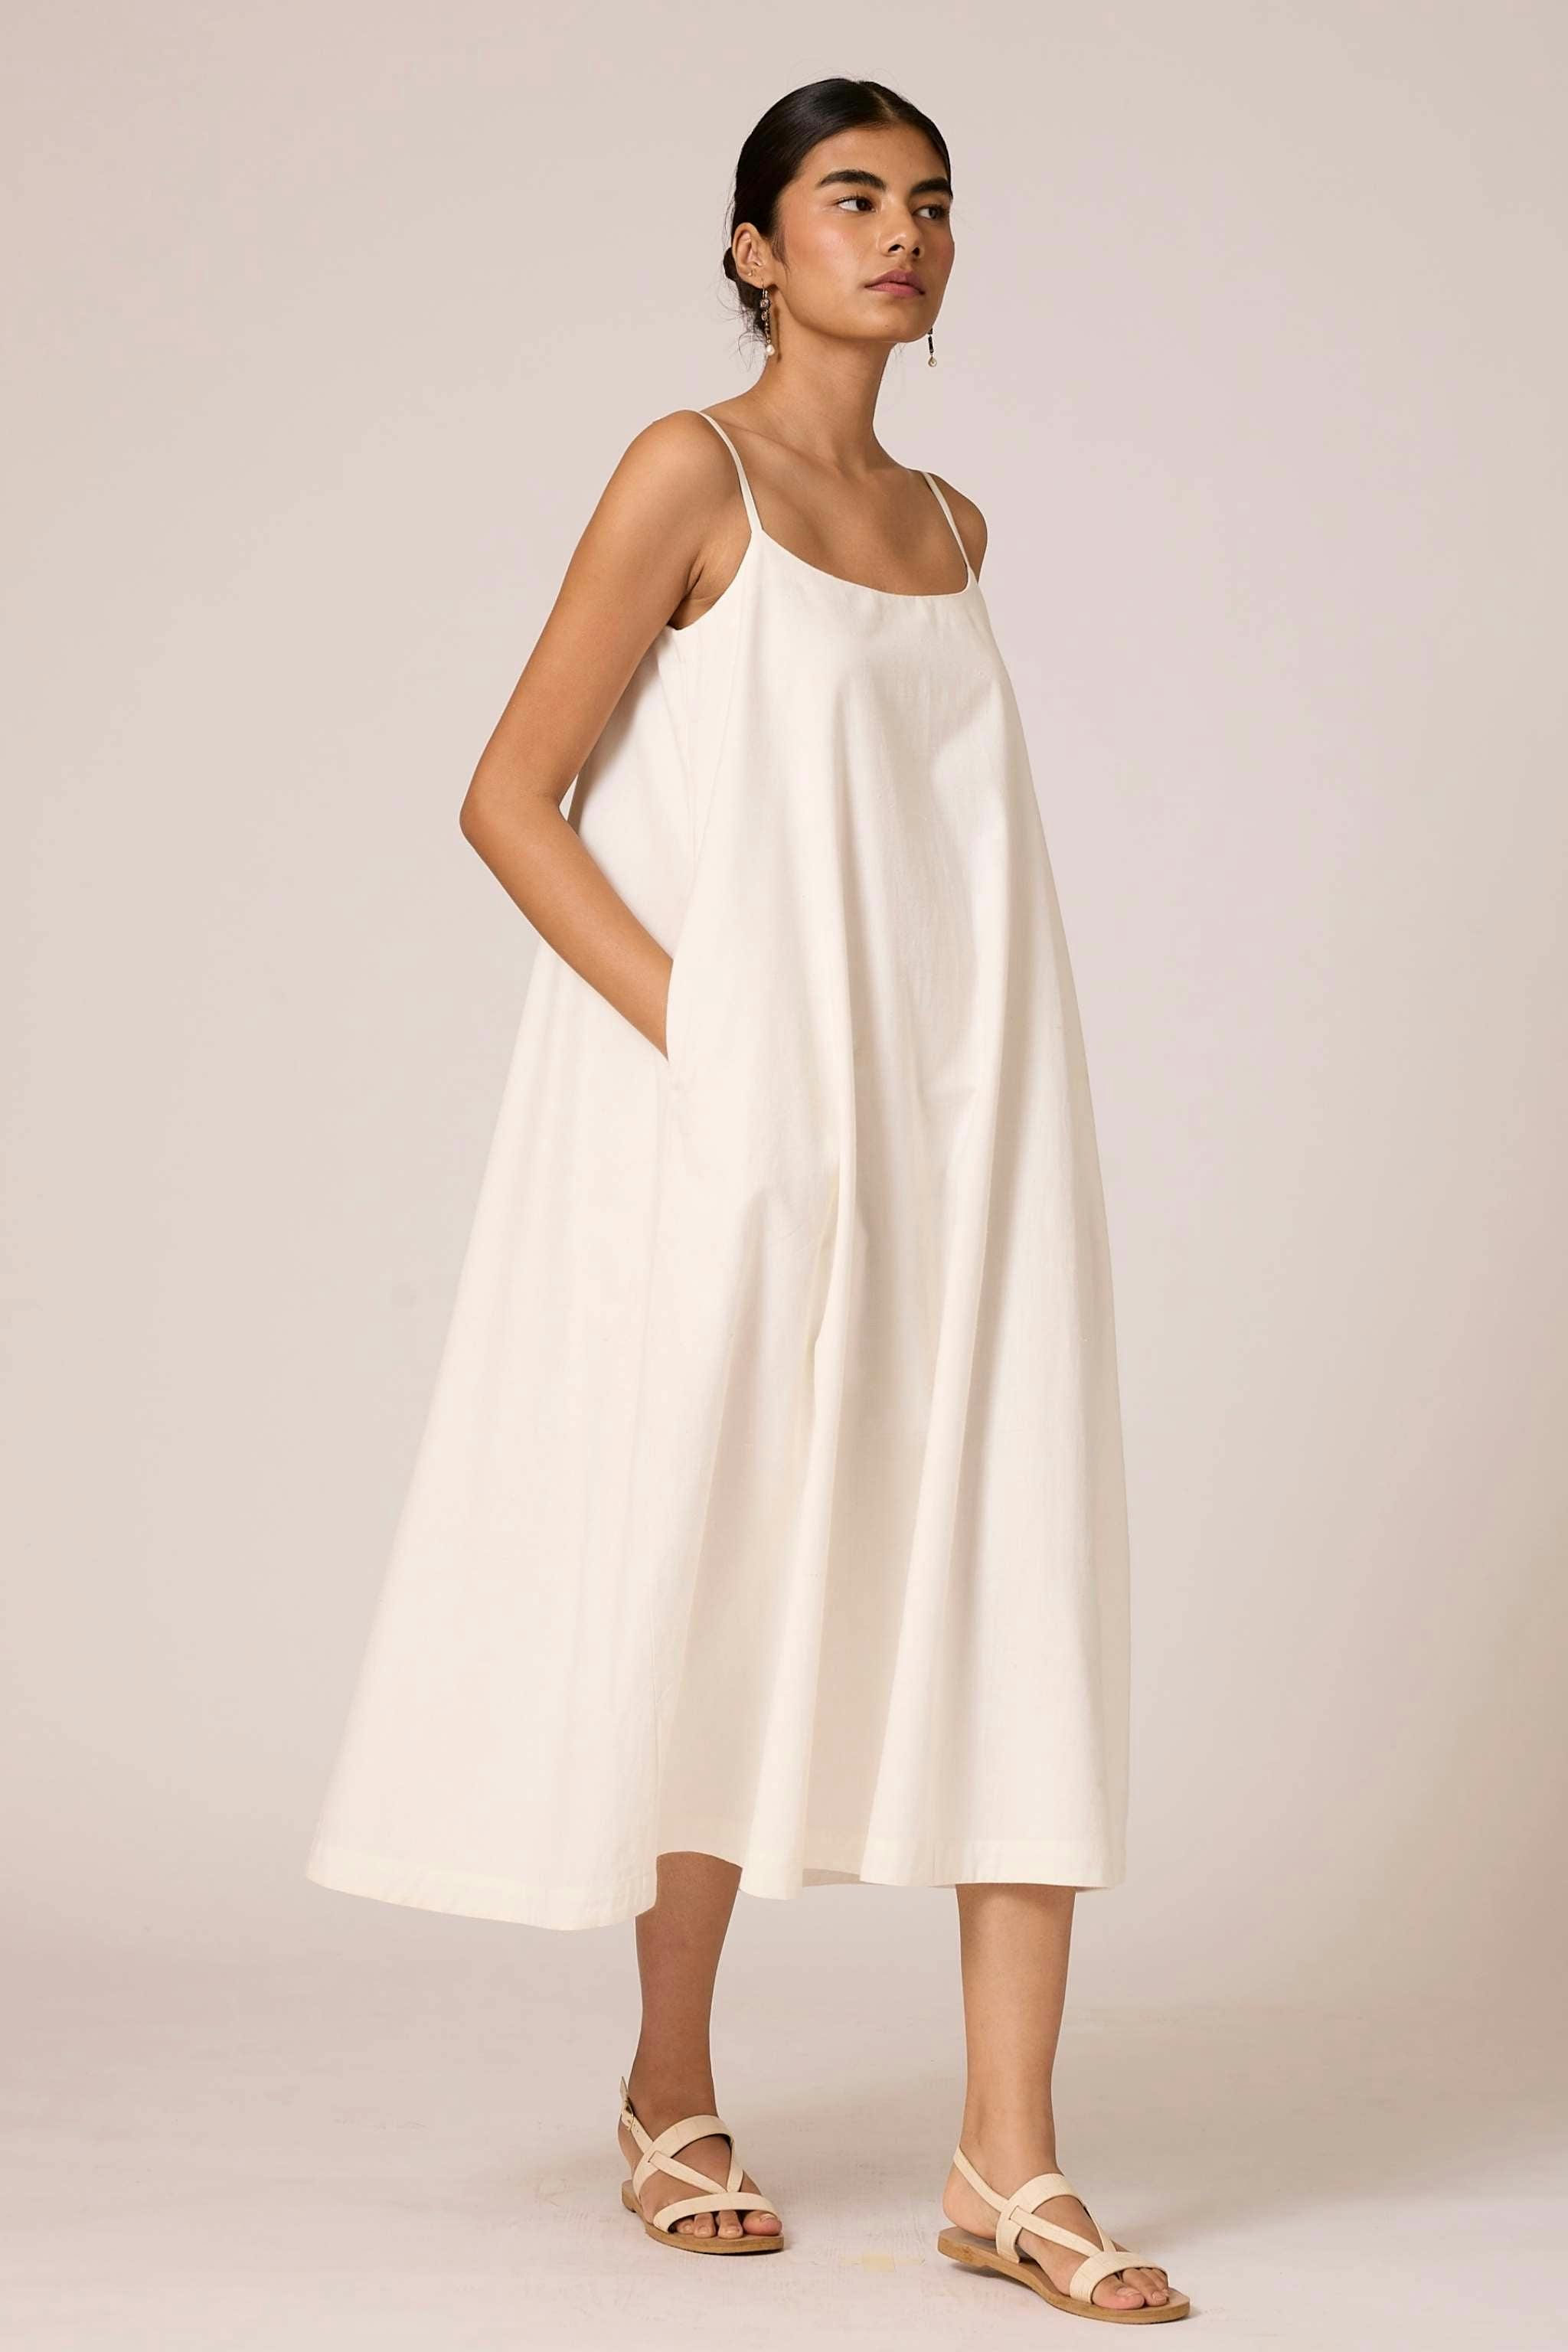 Pele Slip Dress, a product by The Summer House